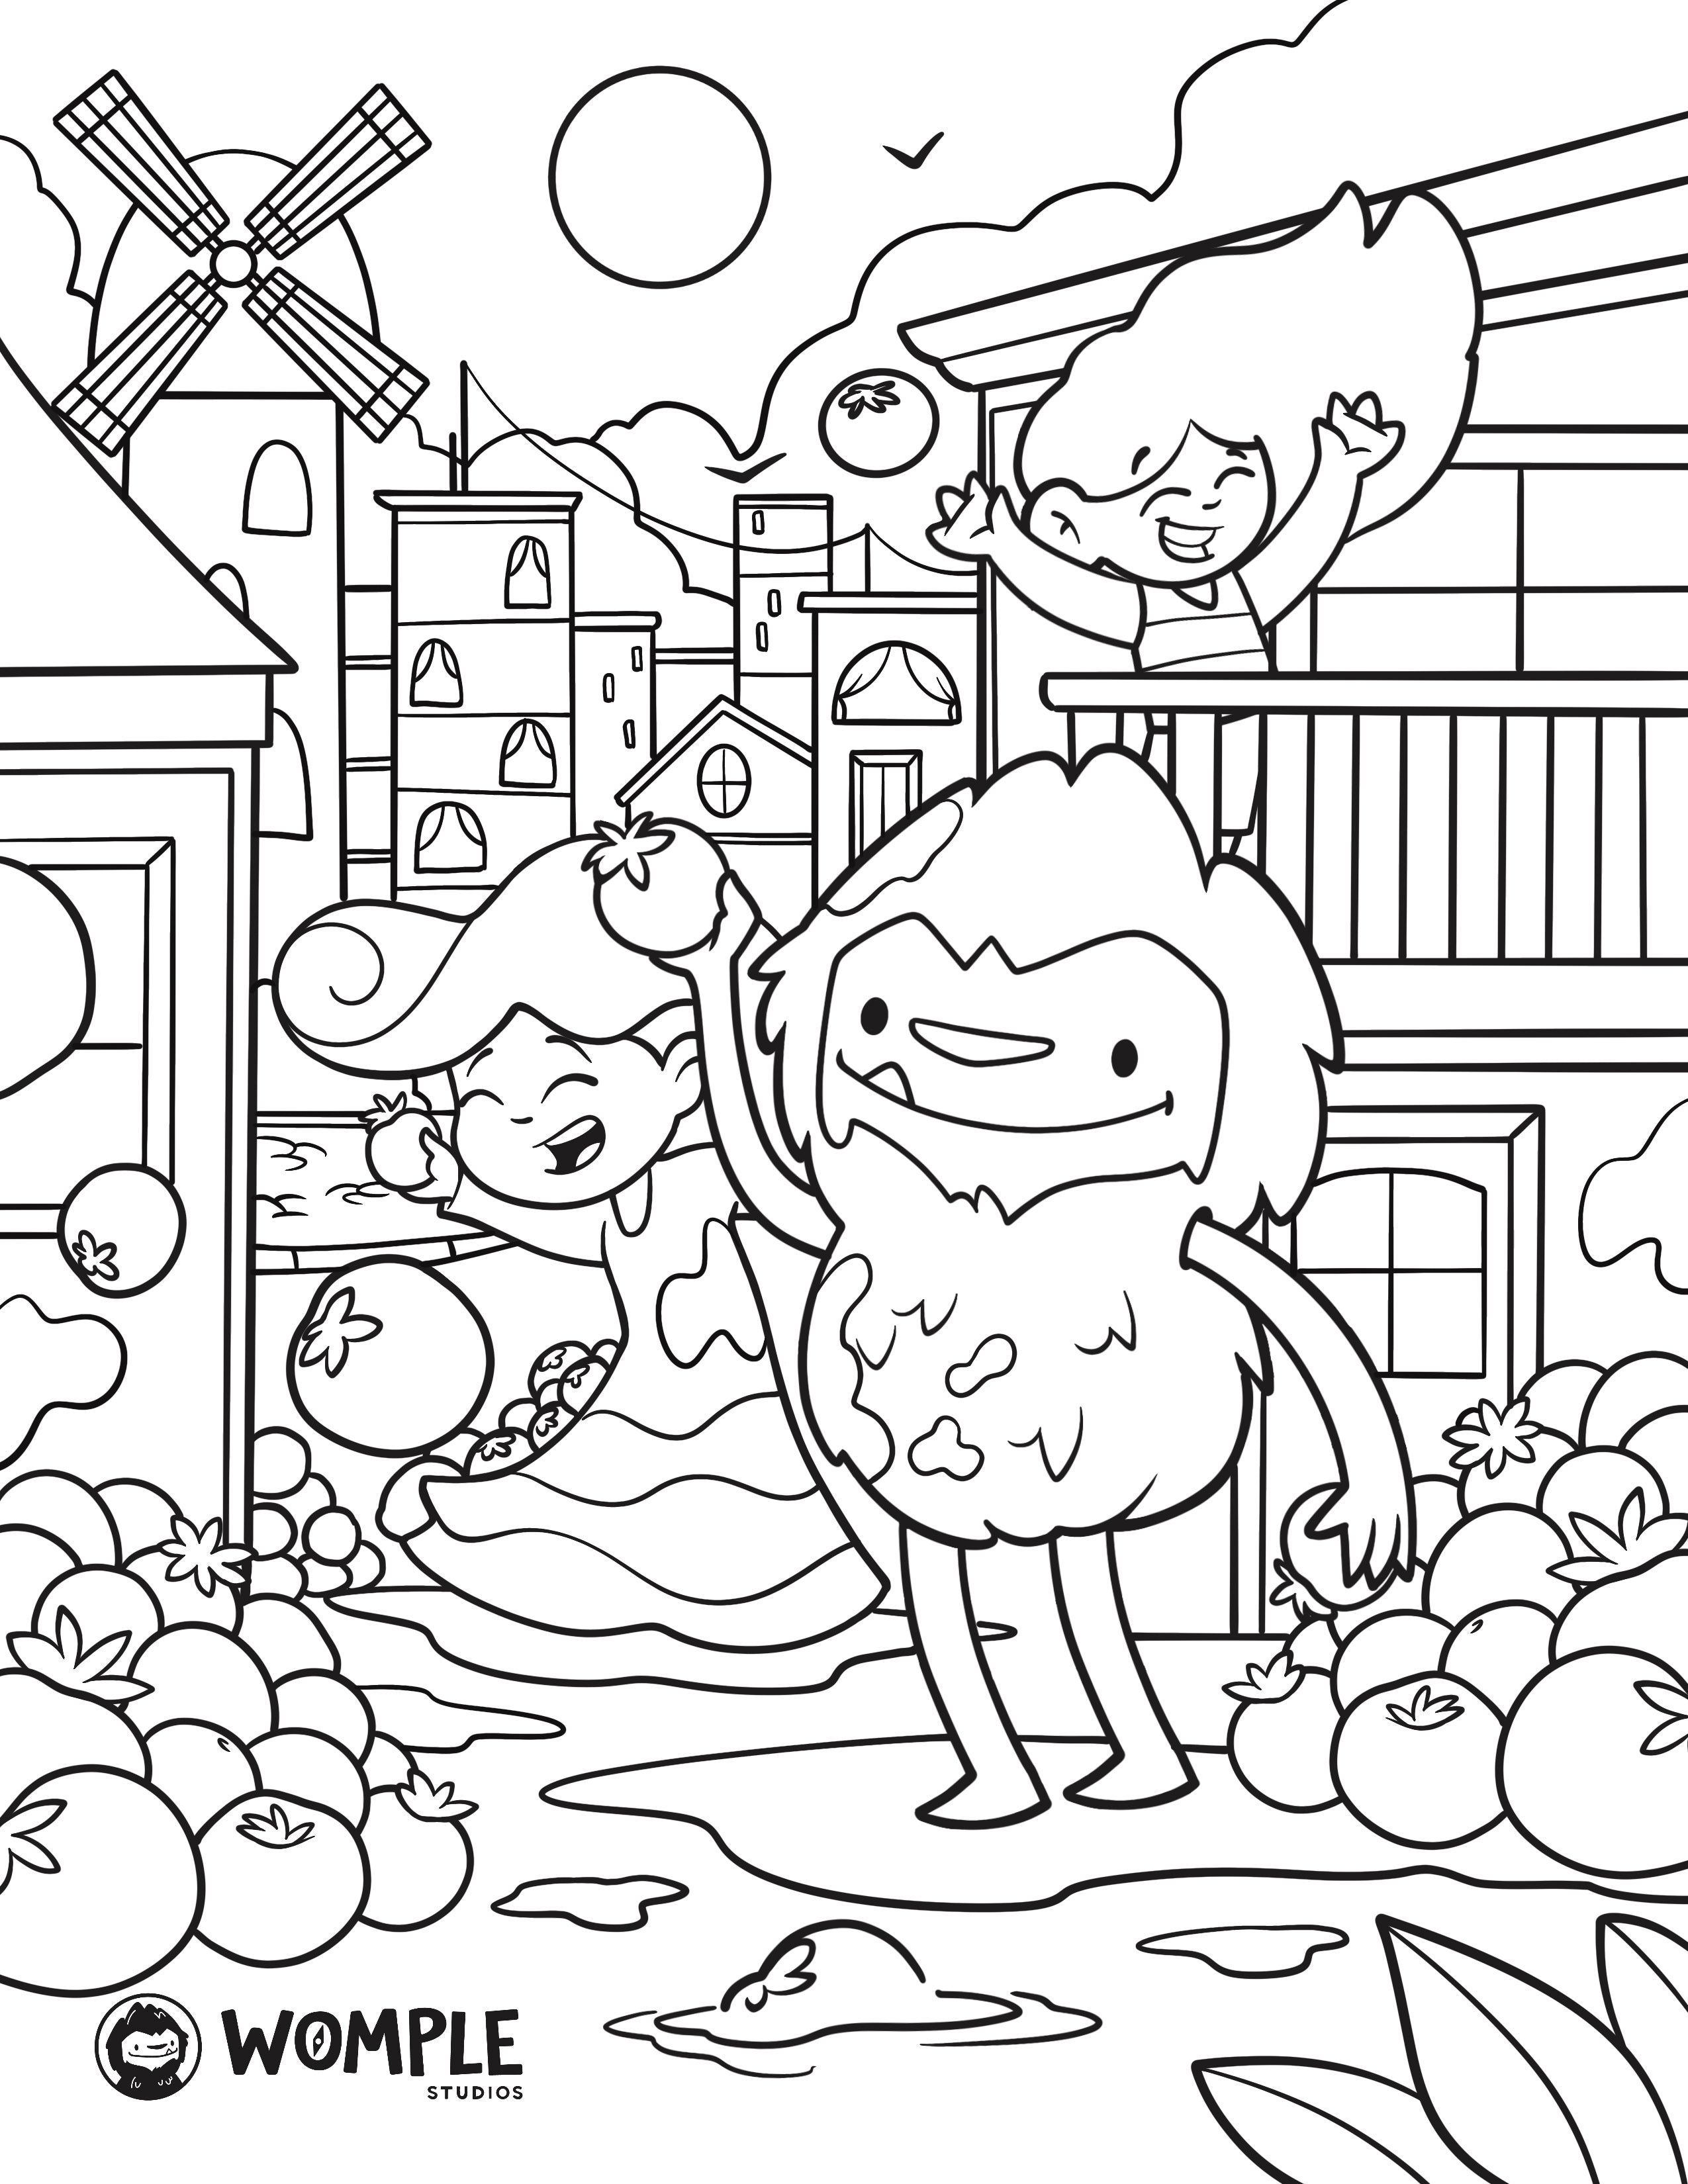 Womple throwing a tomato at La Tomatina Festival Coloring Page